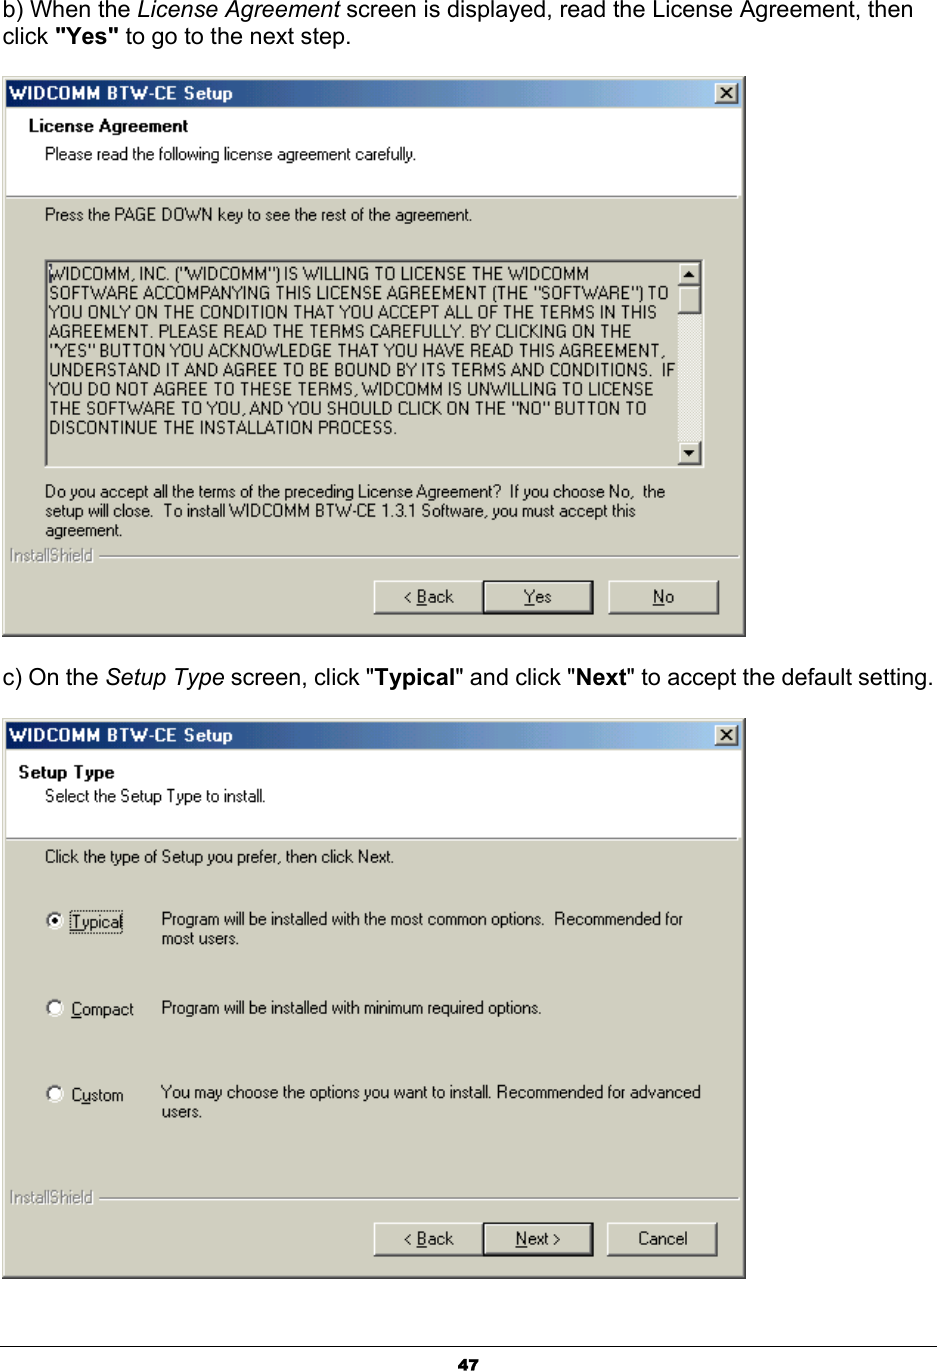   47b) When the License Agreement screen is displayed, read the License Agreement, then click &quot;Yes&quot; to go to the next step.    c) On the Setup Type screen, click &quot;Typical&quot; and click &quot;Next&quot; to accept the default setting.    